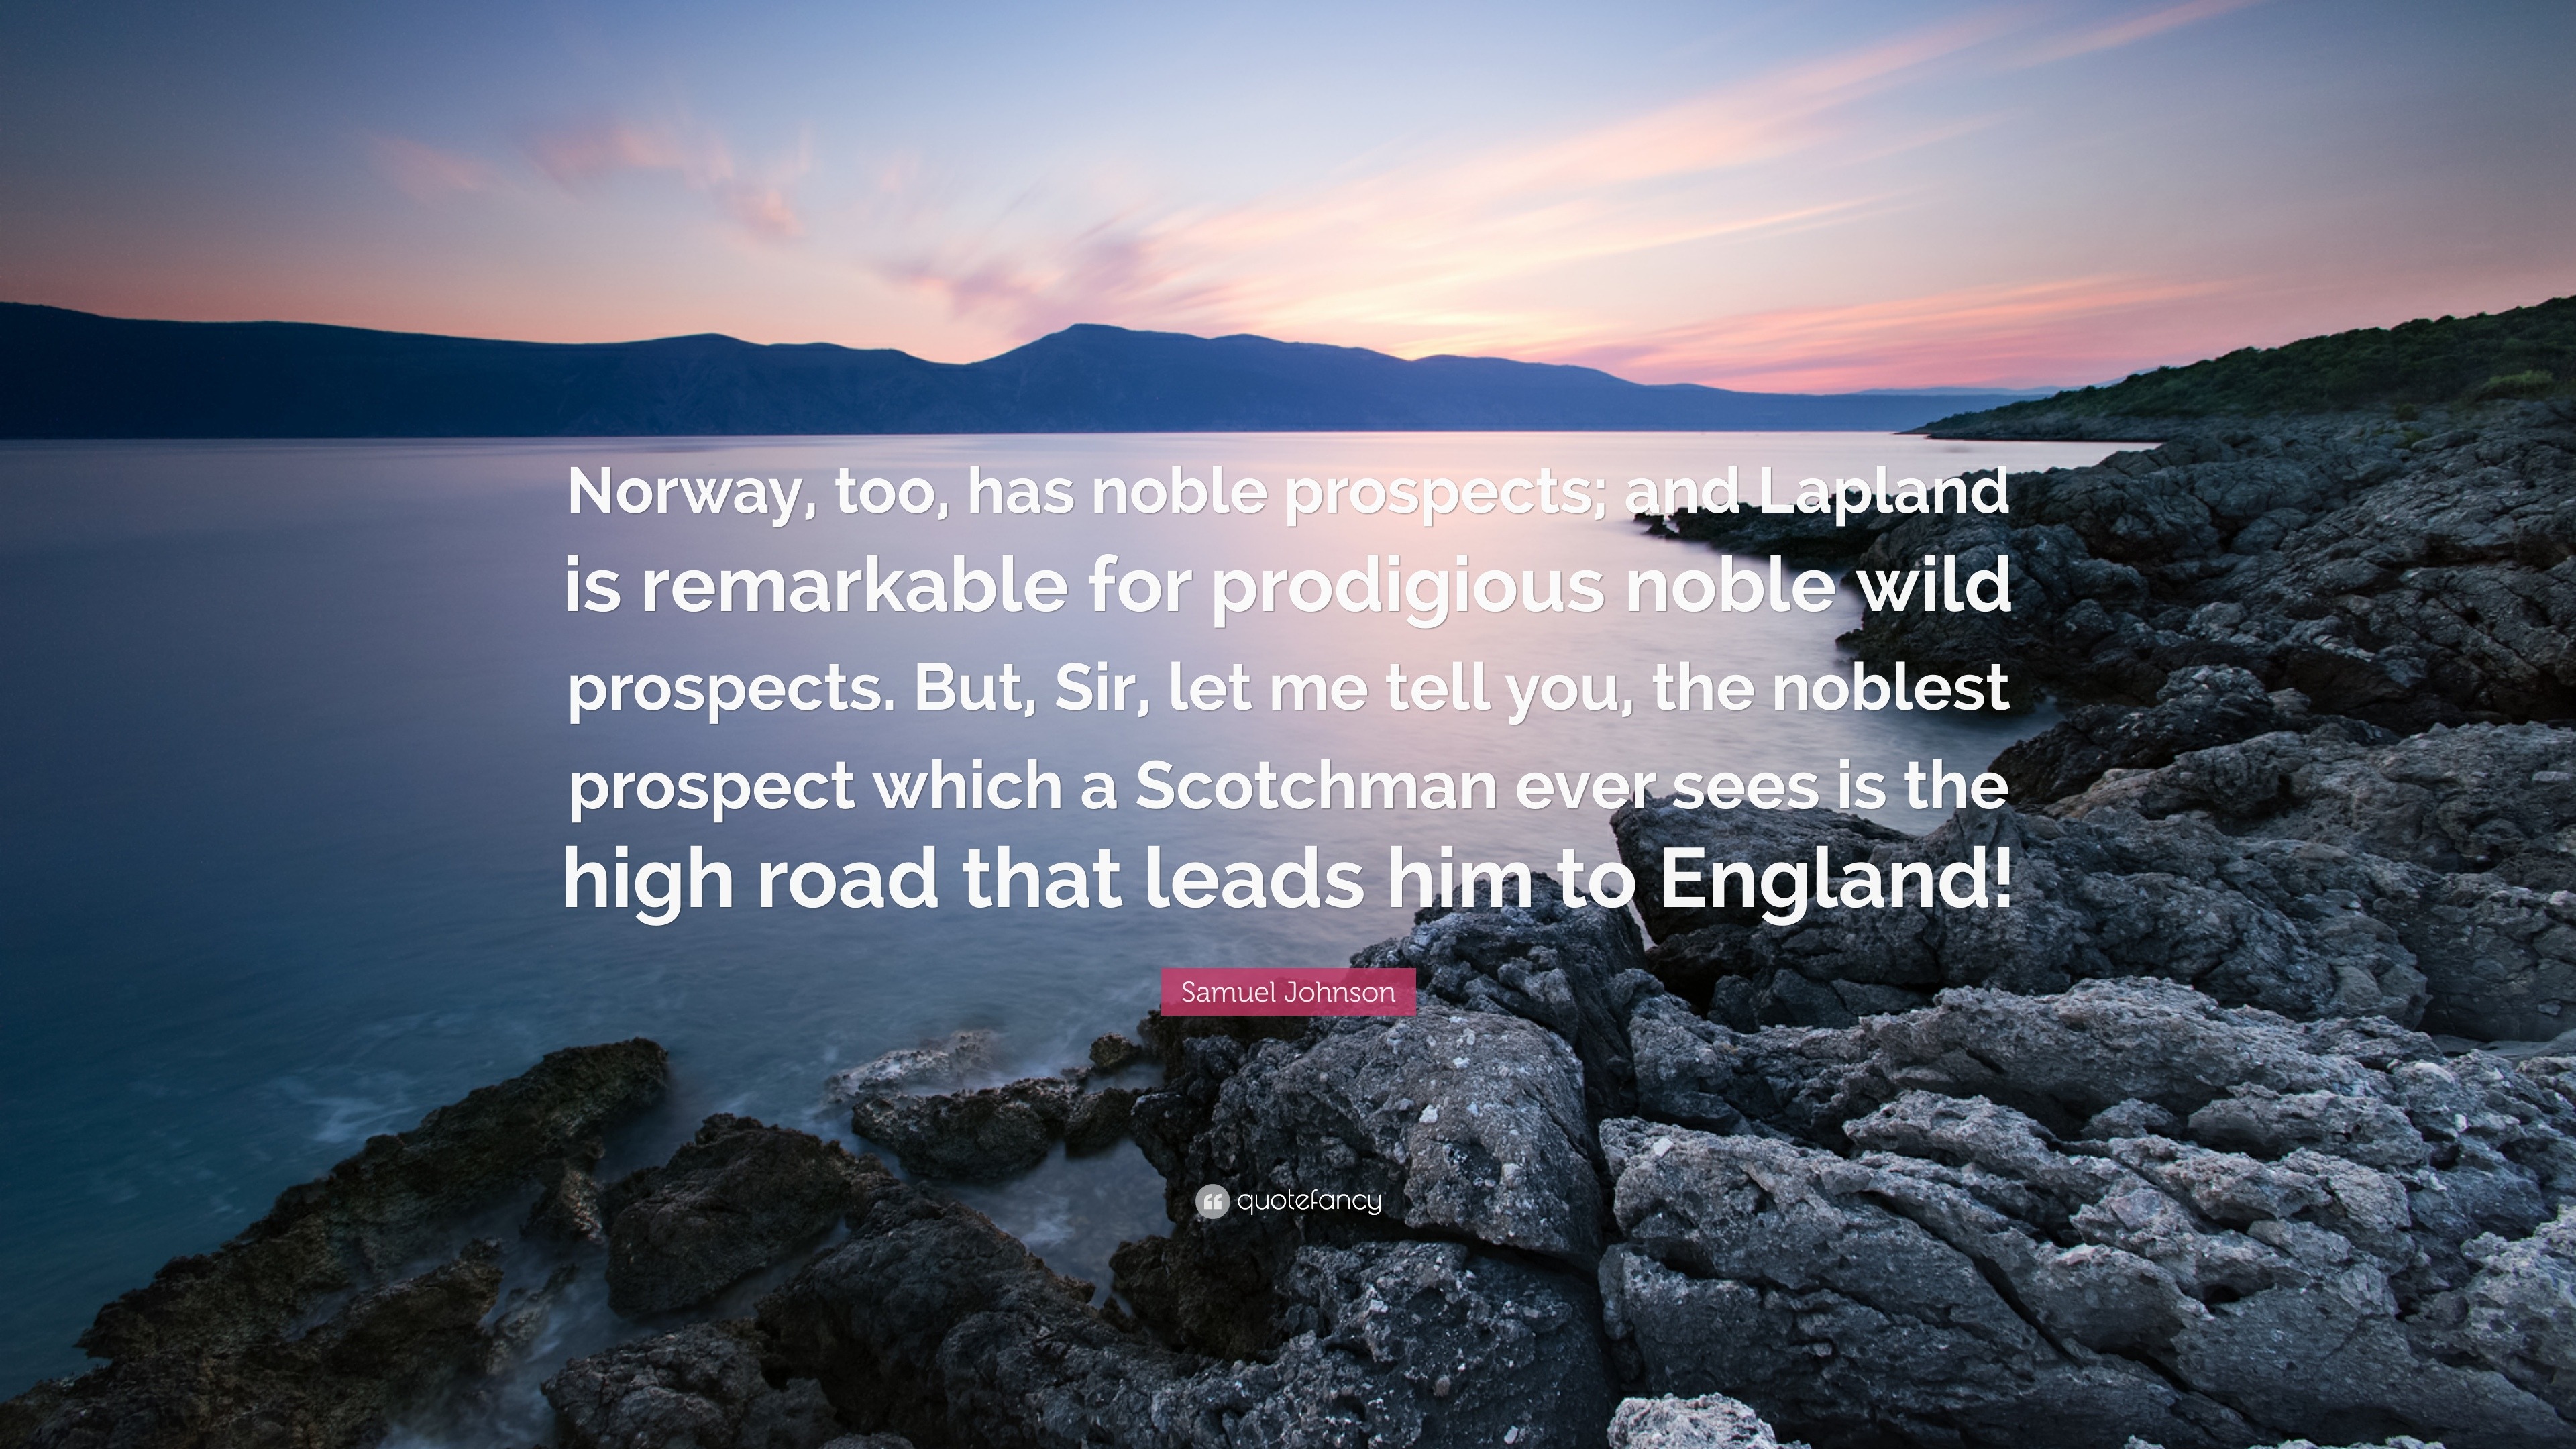 Samuel Johnson Quote: “Norway, too, has noble prospects; and